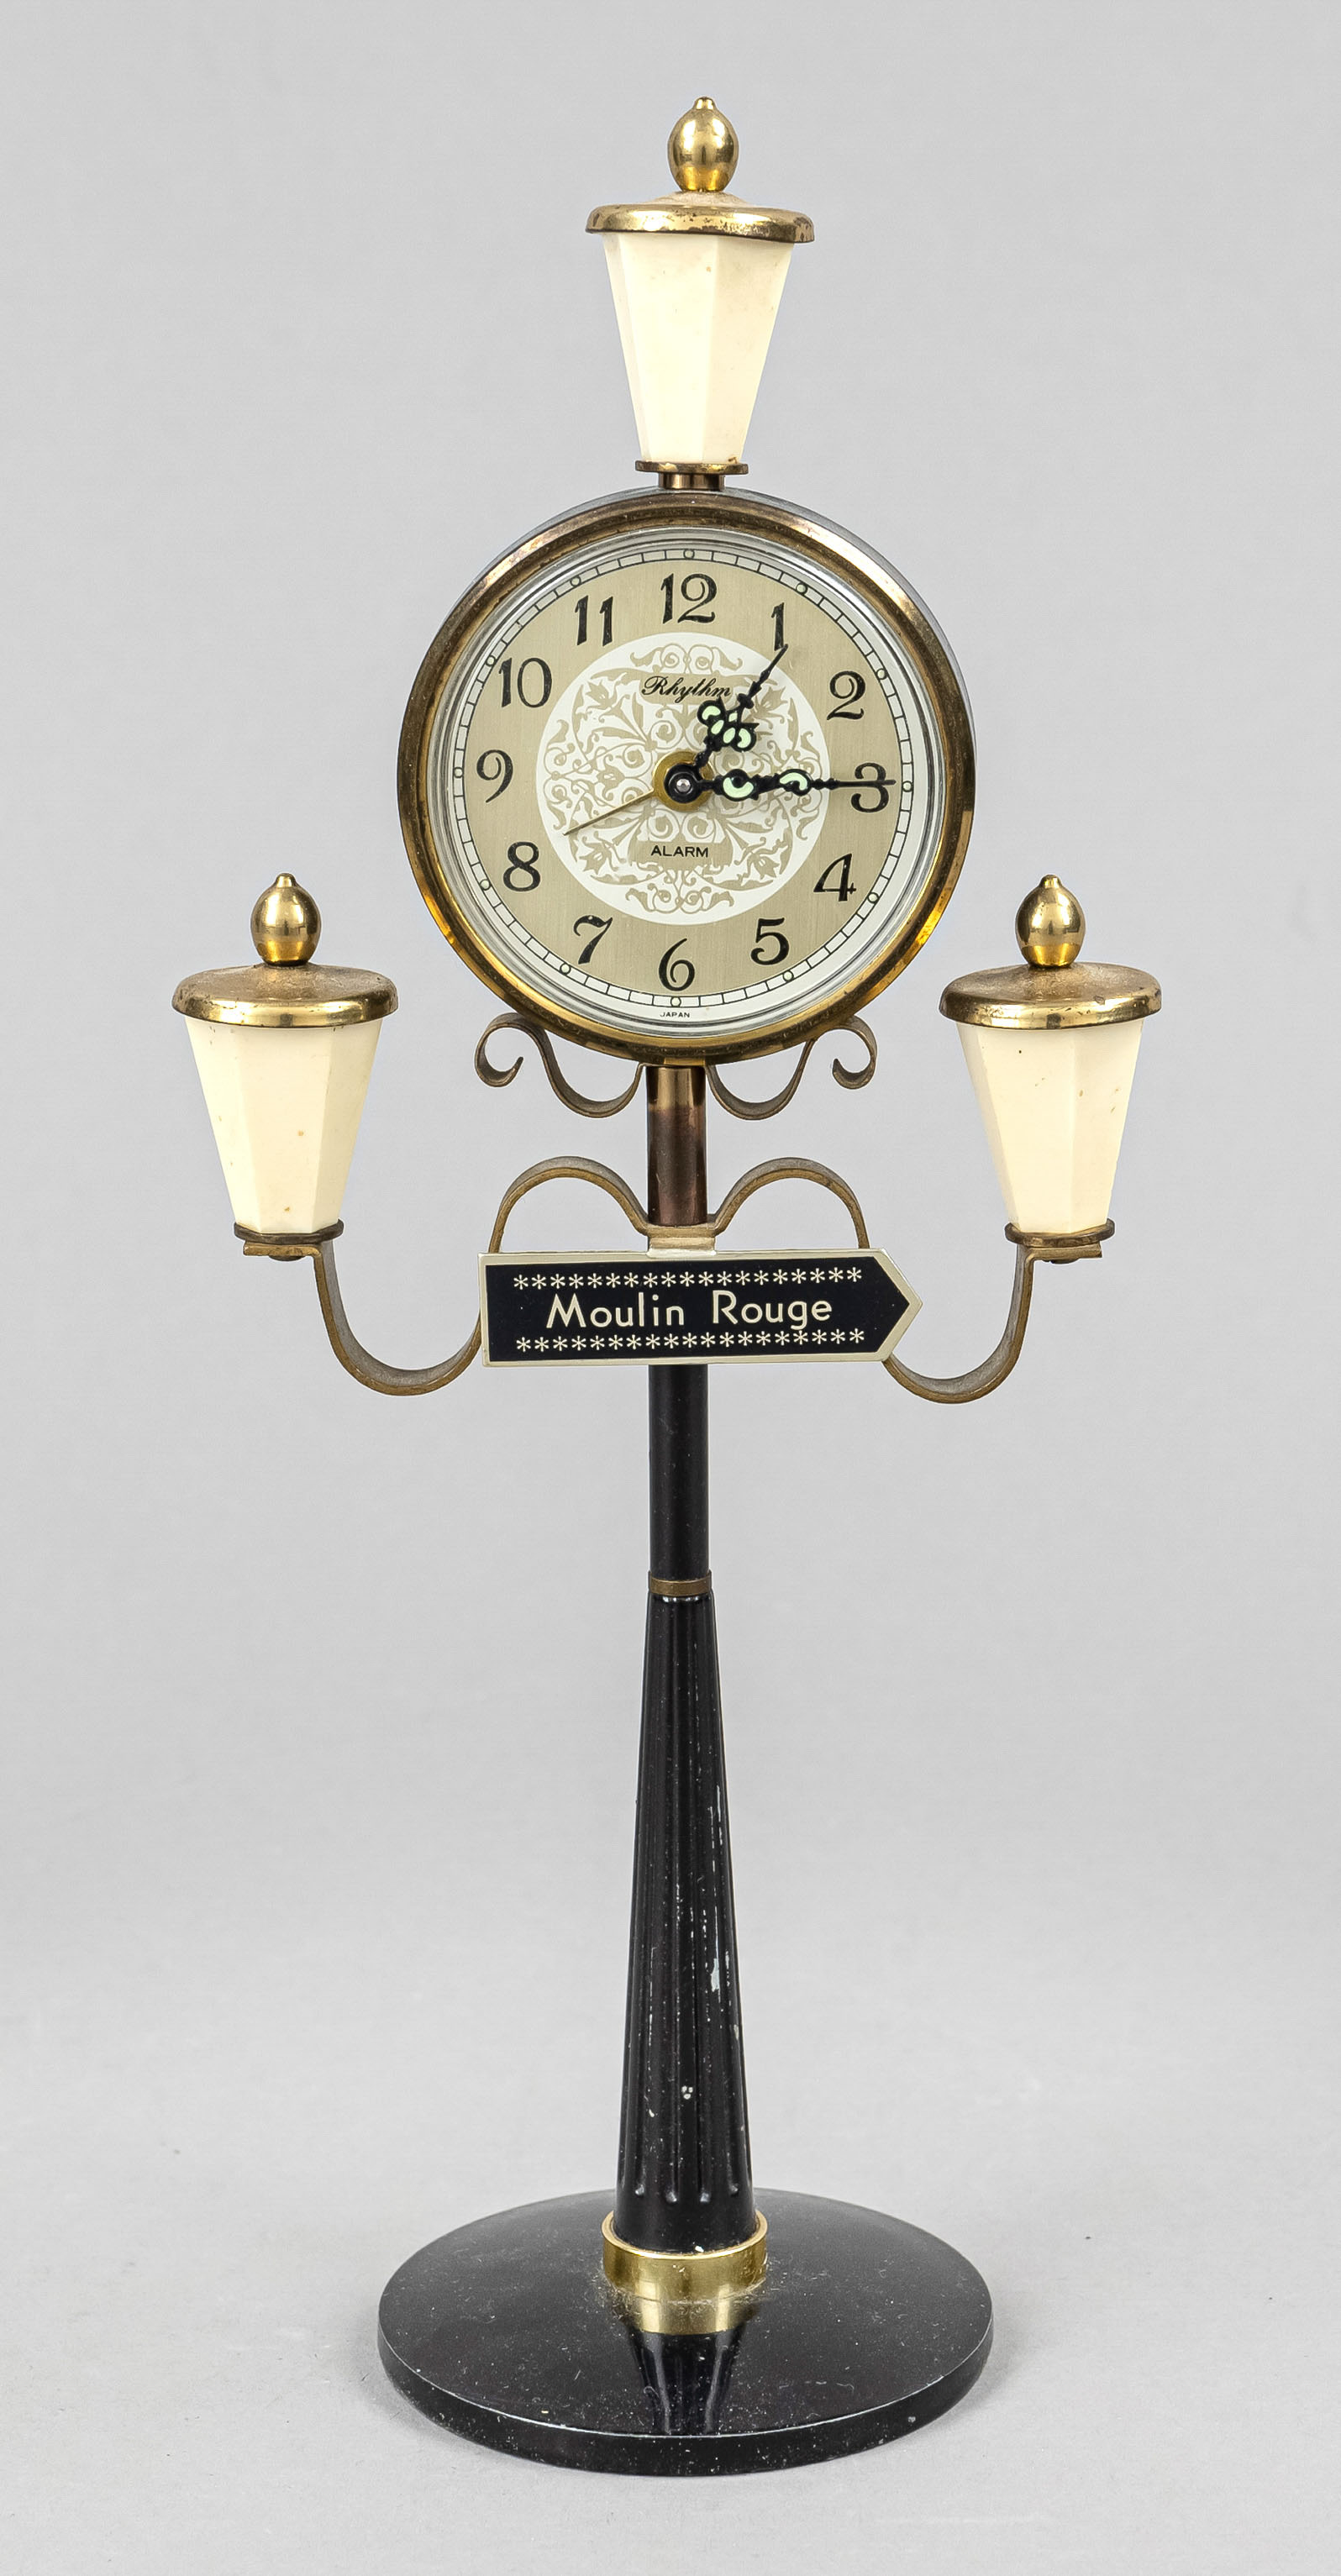 Table clock travel alarm clock, in the shape of a lantern, black base with gilded decorative